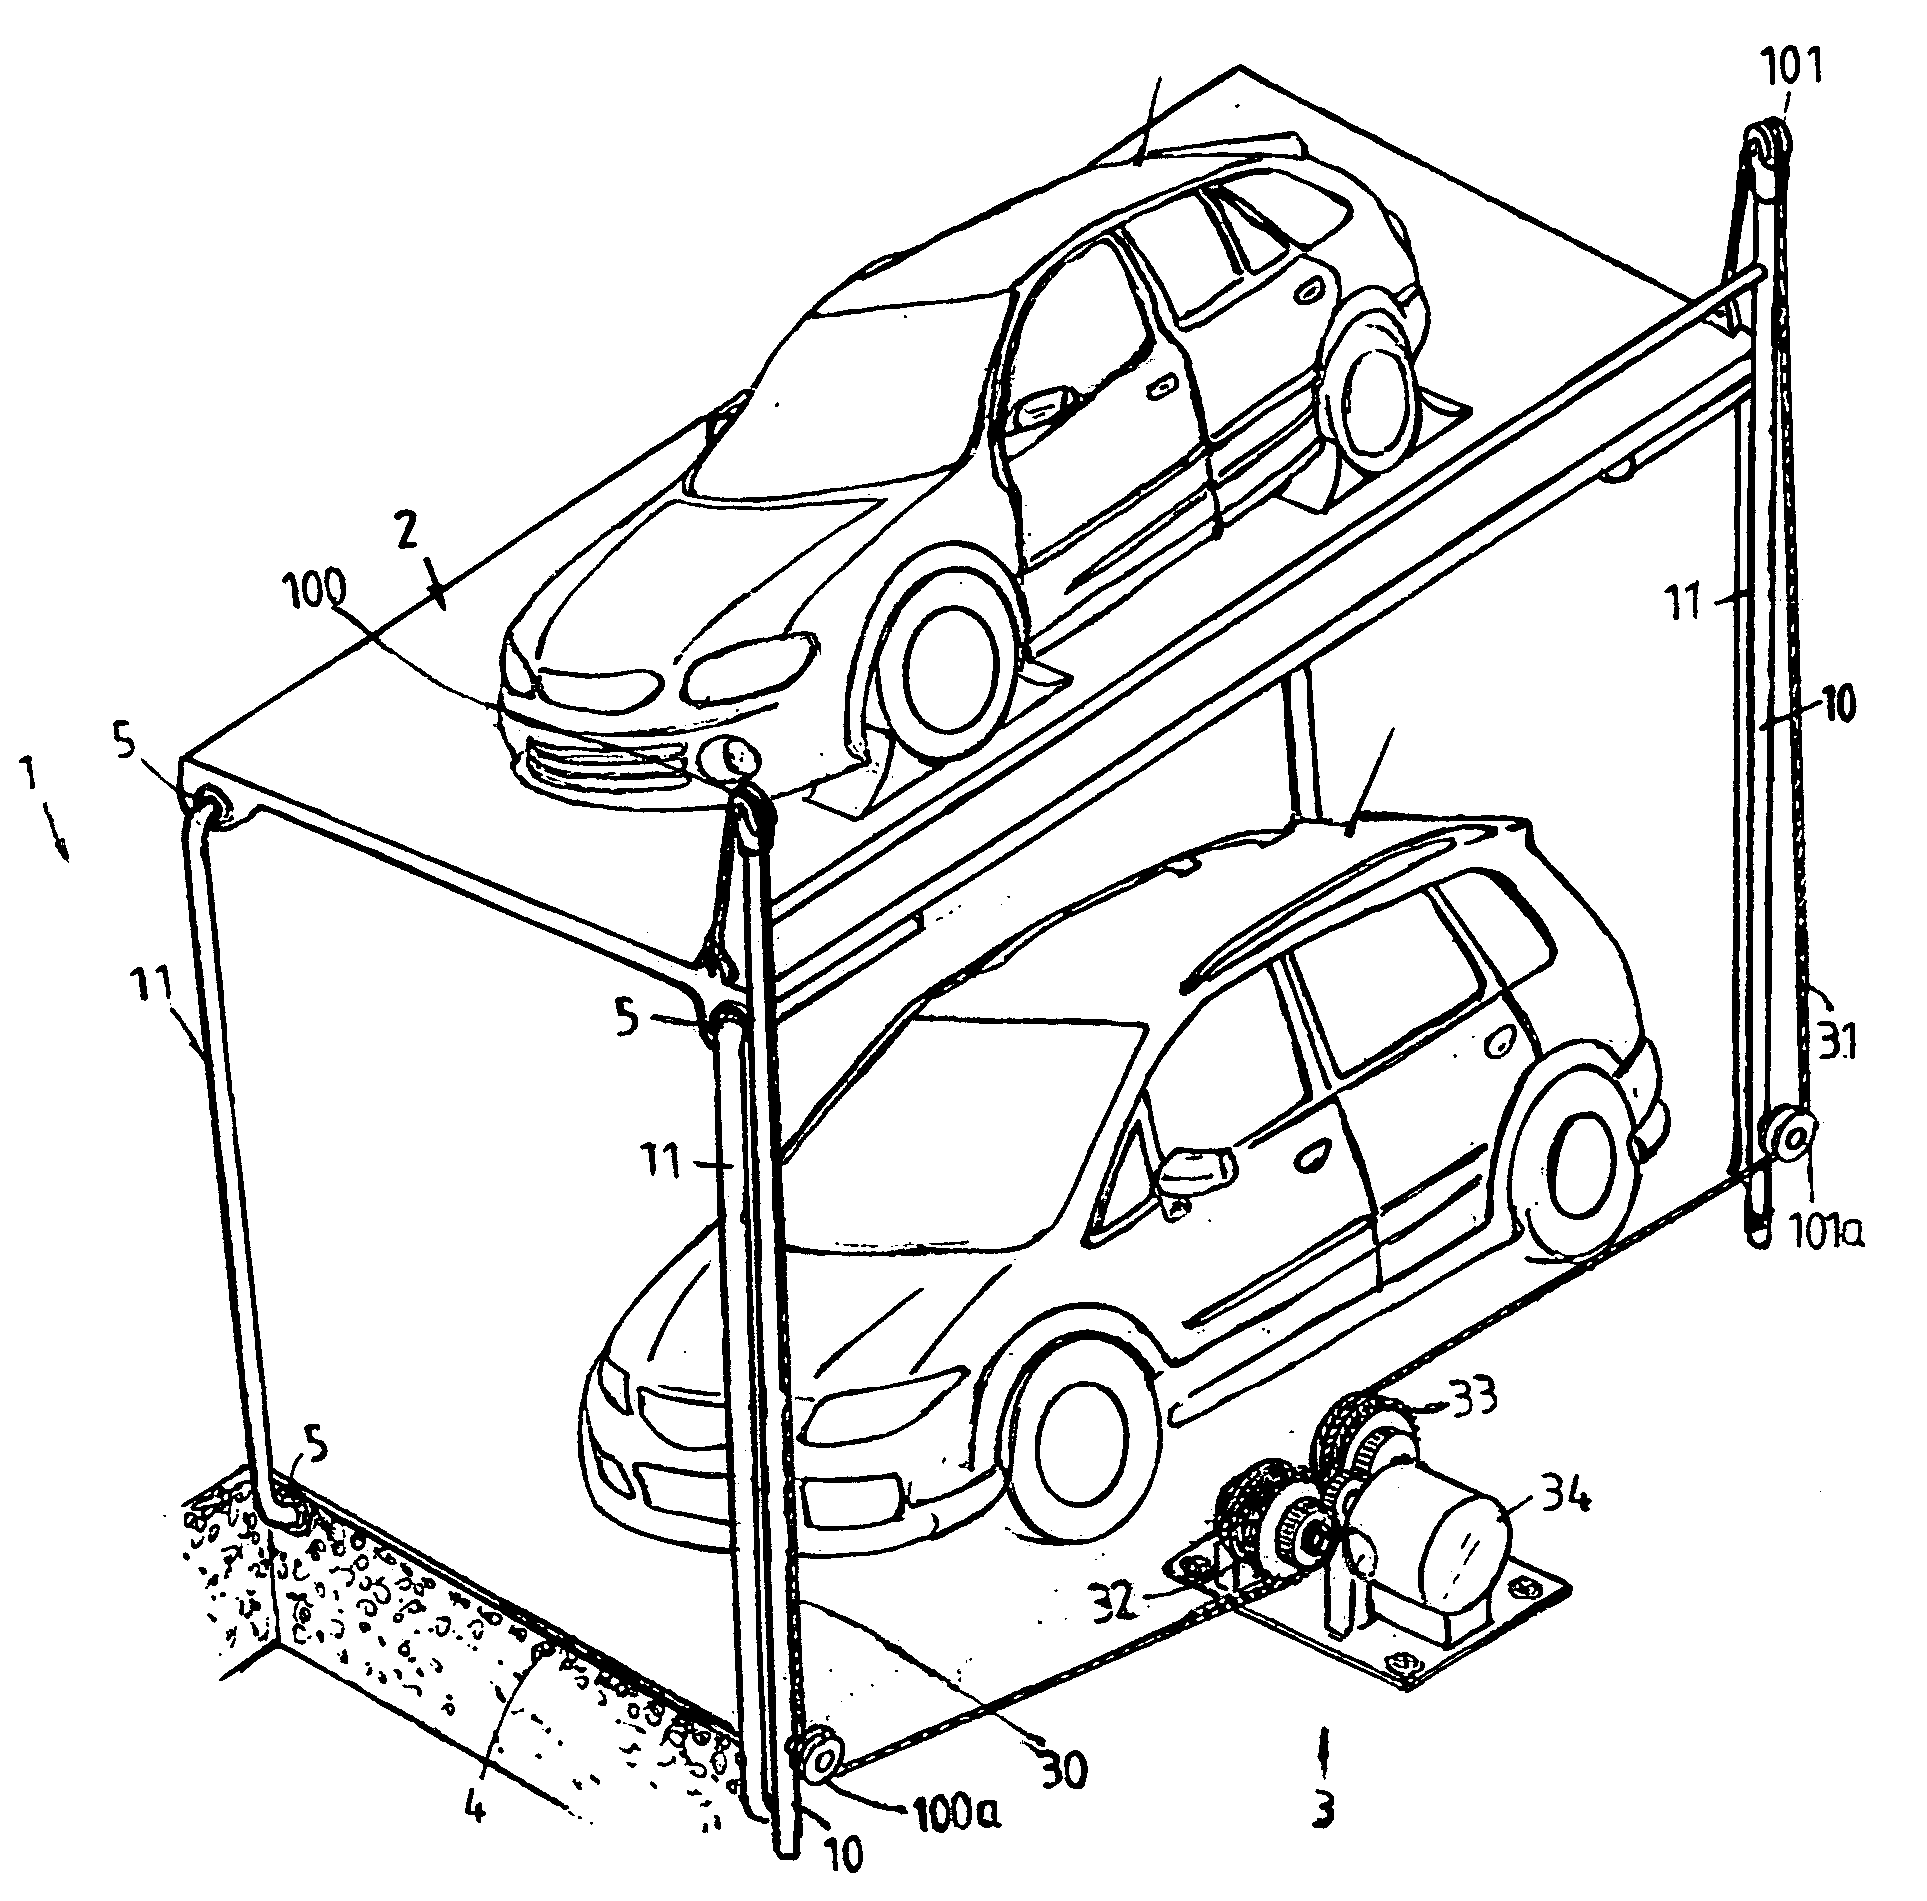 Road side parking apparatus